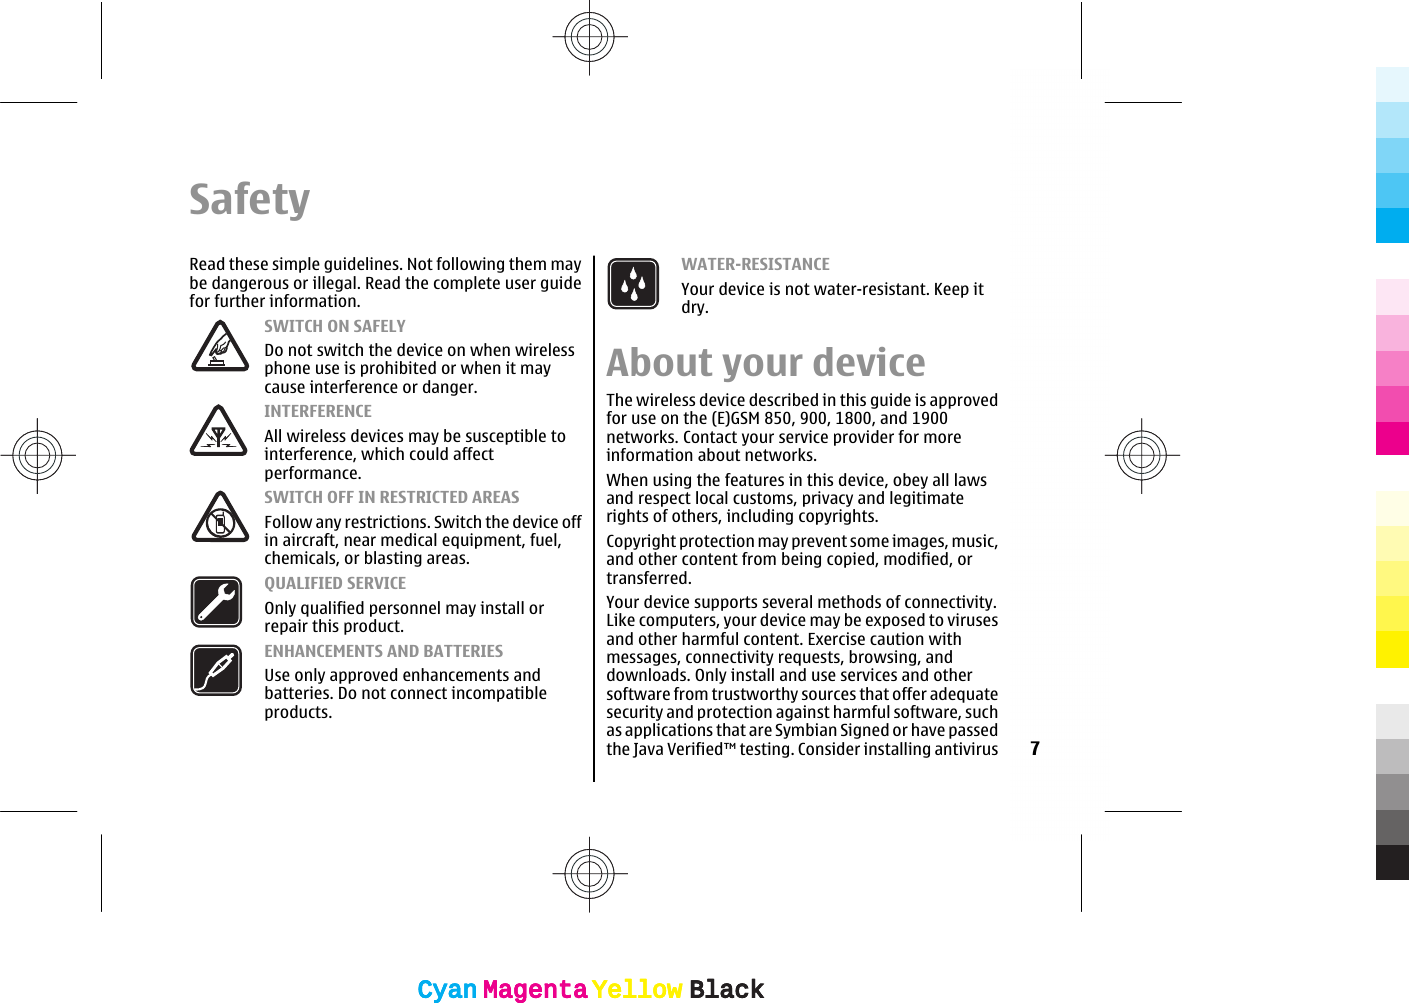 SafetyRead these simple guidelines. Not following them maybe dangerous or illegal. Read the complete user guidefor further information.SWITCH ON SAFELYDo not switch the device on when wirelessphone use is prohibited or when it maycause interference or danger.INTERFERENCEAll wireless devices may be susceptible tointerference, which could affectperformance.SWITCH OFF IN RESTRICTED AREASFollow any restrictions. Switch the device offin aircraft, near medical equipment, fuel,chemicals, or blasting areas.QUALIFIED SERVICEOnly qualified personnel may install orrepair this product.ENHANCEMENTS AND BATTERIESUse only approved enhancements andbatteries. Do not connect incompatibleproducts.WATER-RESISTANCEYour device is not water-resistant. Keep itdry.About your deviceThe wireless device described in this guide is approvedfor use on the (E)GSM 850, 900, 1800, and 1900networks. Contact your service provider for moreinformation about networks.When using the features in this device, obey all lawsand respect local customs, privacy and legitimaterights of others, including copyrights.Copyright protection may prevent some images, music,and other content from being copied, modified, ortransferred.Your device supports several methods of connectivity.Like computers, your device may be exposed to virusesand other harmful content. Exercise caution withmessages, connectivity requests, browsing, anddownloads. Only install and use services and othersoftware from trustworthy sources that offer adequatesecurity and protection against harmful software, suchas applications that are Symbian Signed or have passedthe Java Verified™ testing. Consider installing antivirus 7CyanCyanMagentaMagentaYellowYellowBlackBlackCyanCyanMagentaMagentaYellowYellowBlackBlack